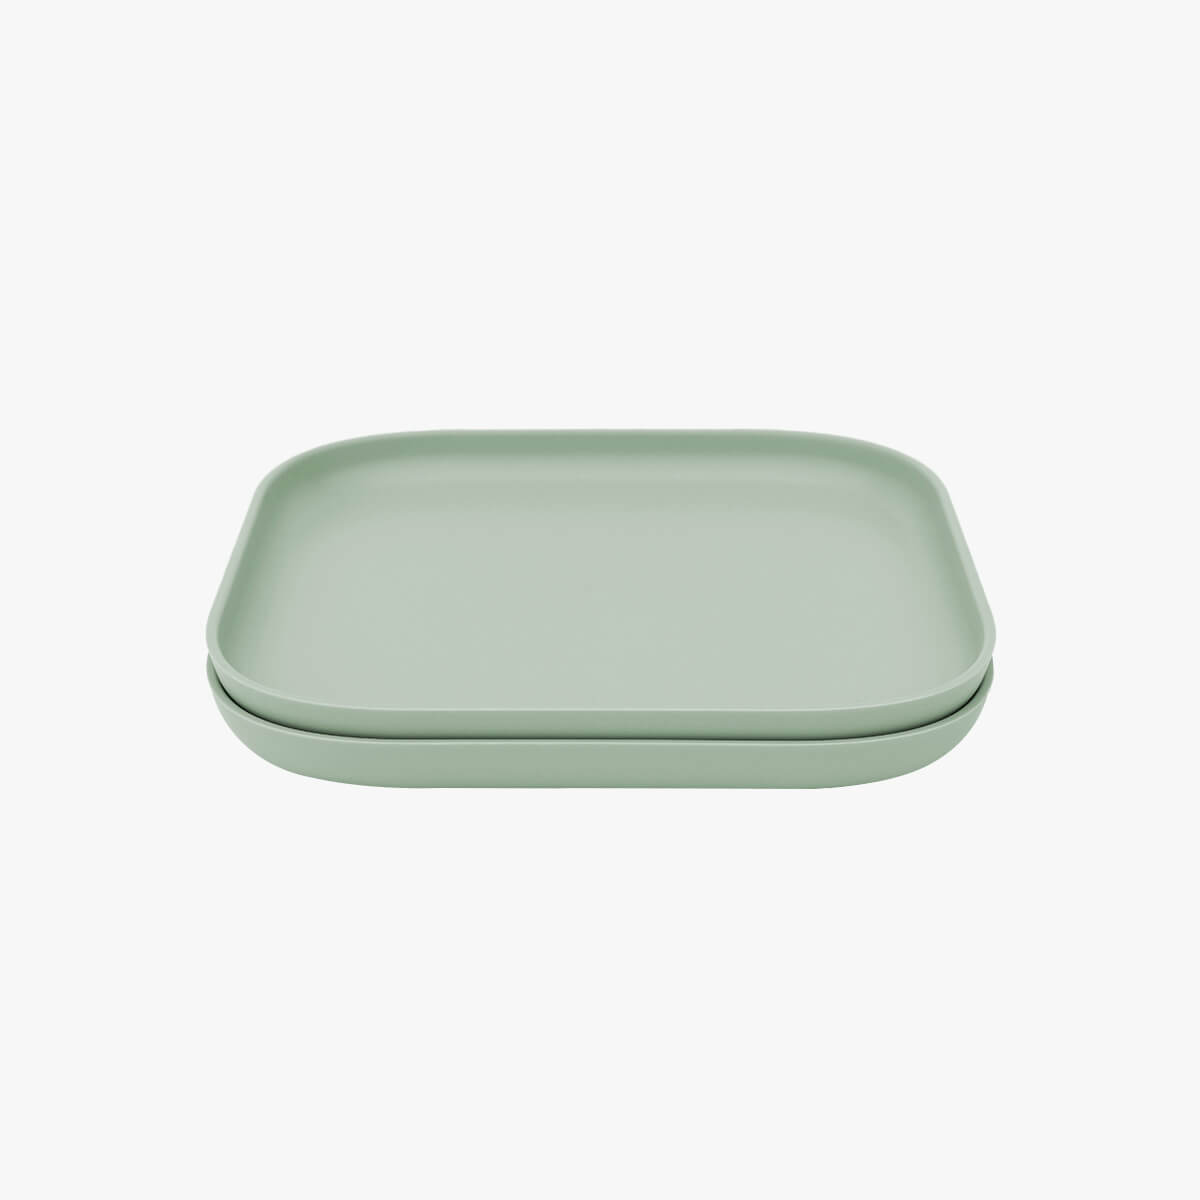 Mealtime Plate in Sage / ezpz Basics Line / Stylish, Durable Plates for Big Kids